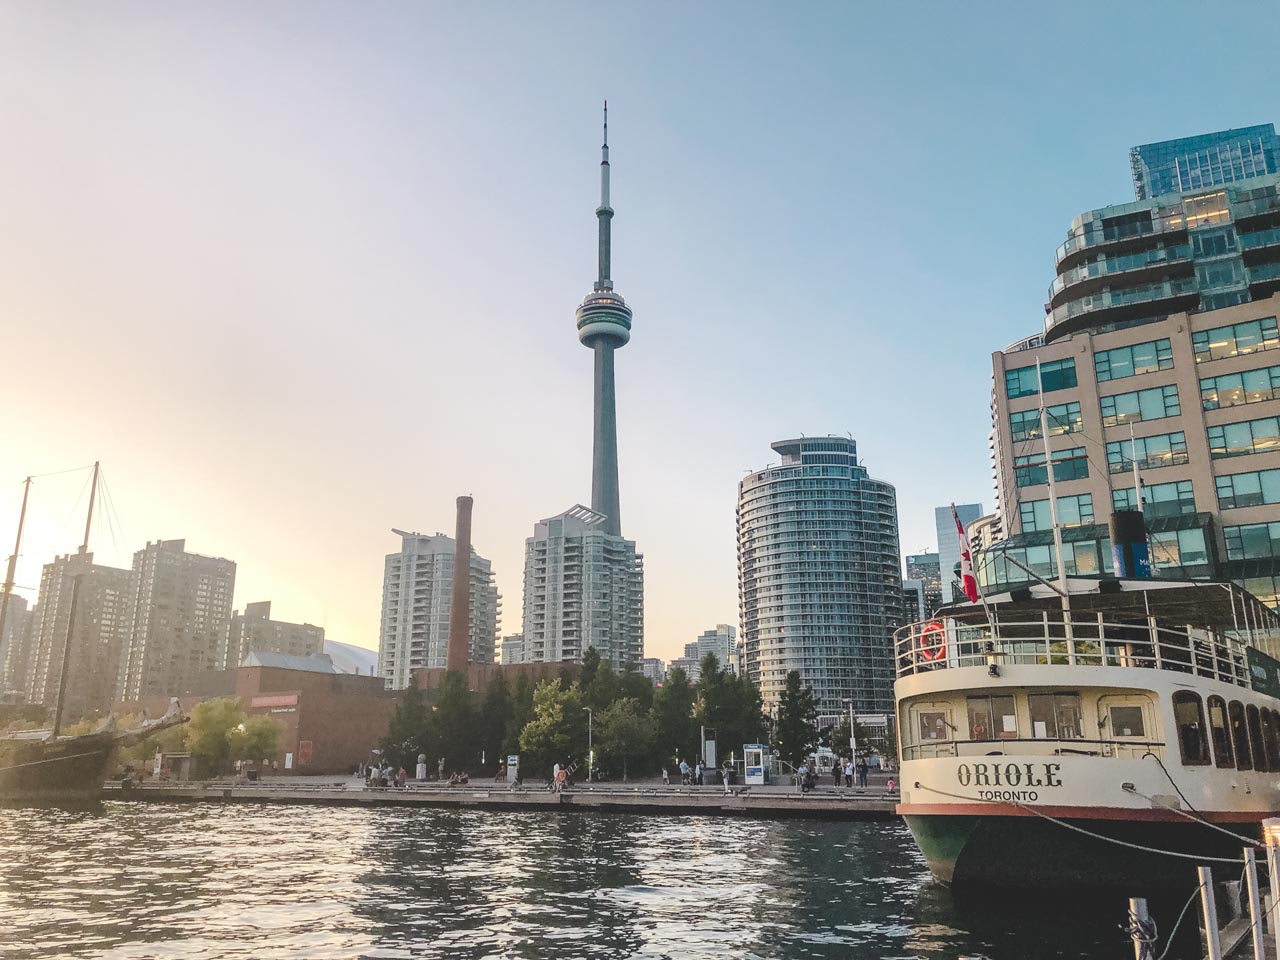 CN Tower and the Toronto skyline at sunset seen from the harbour